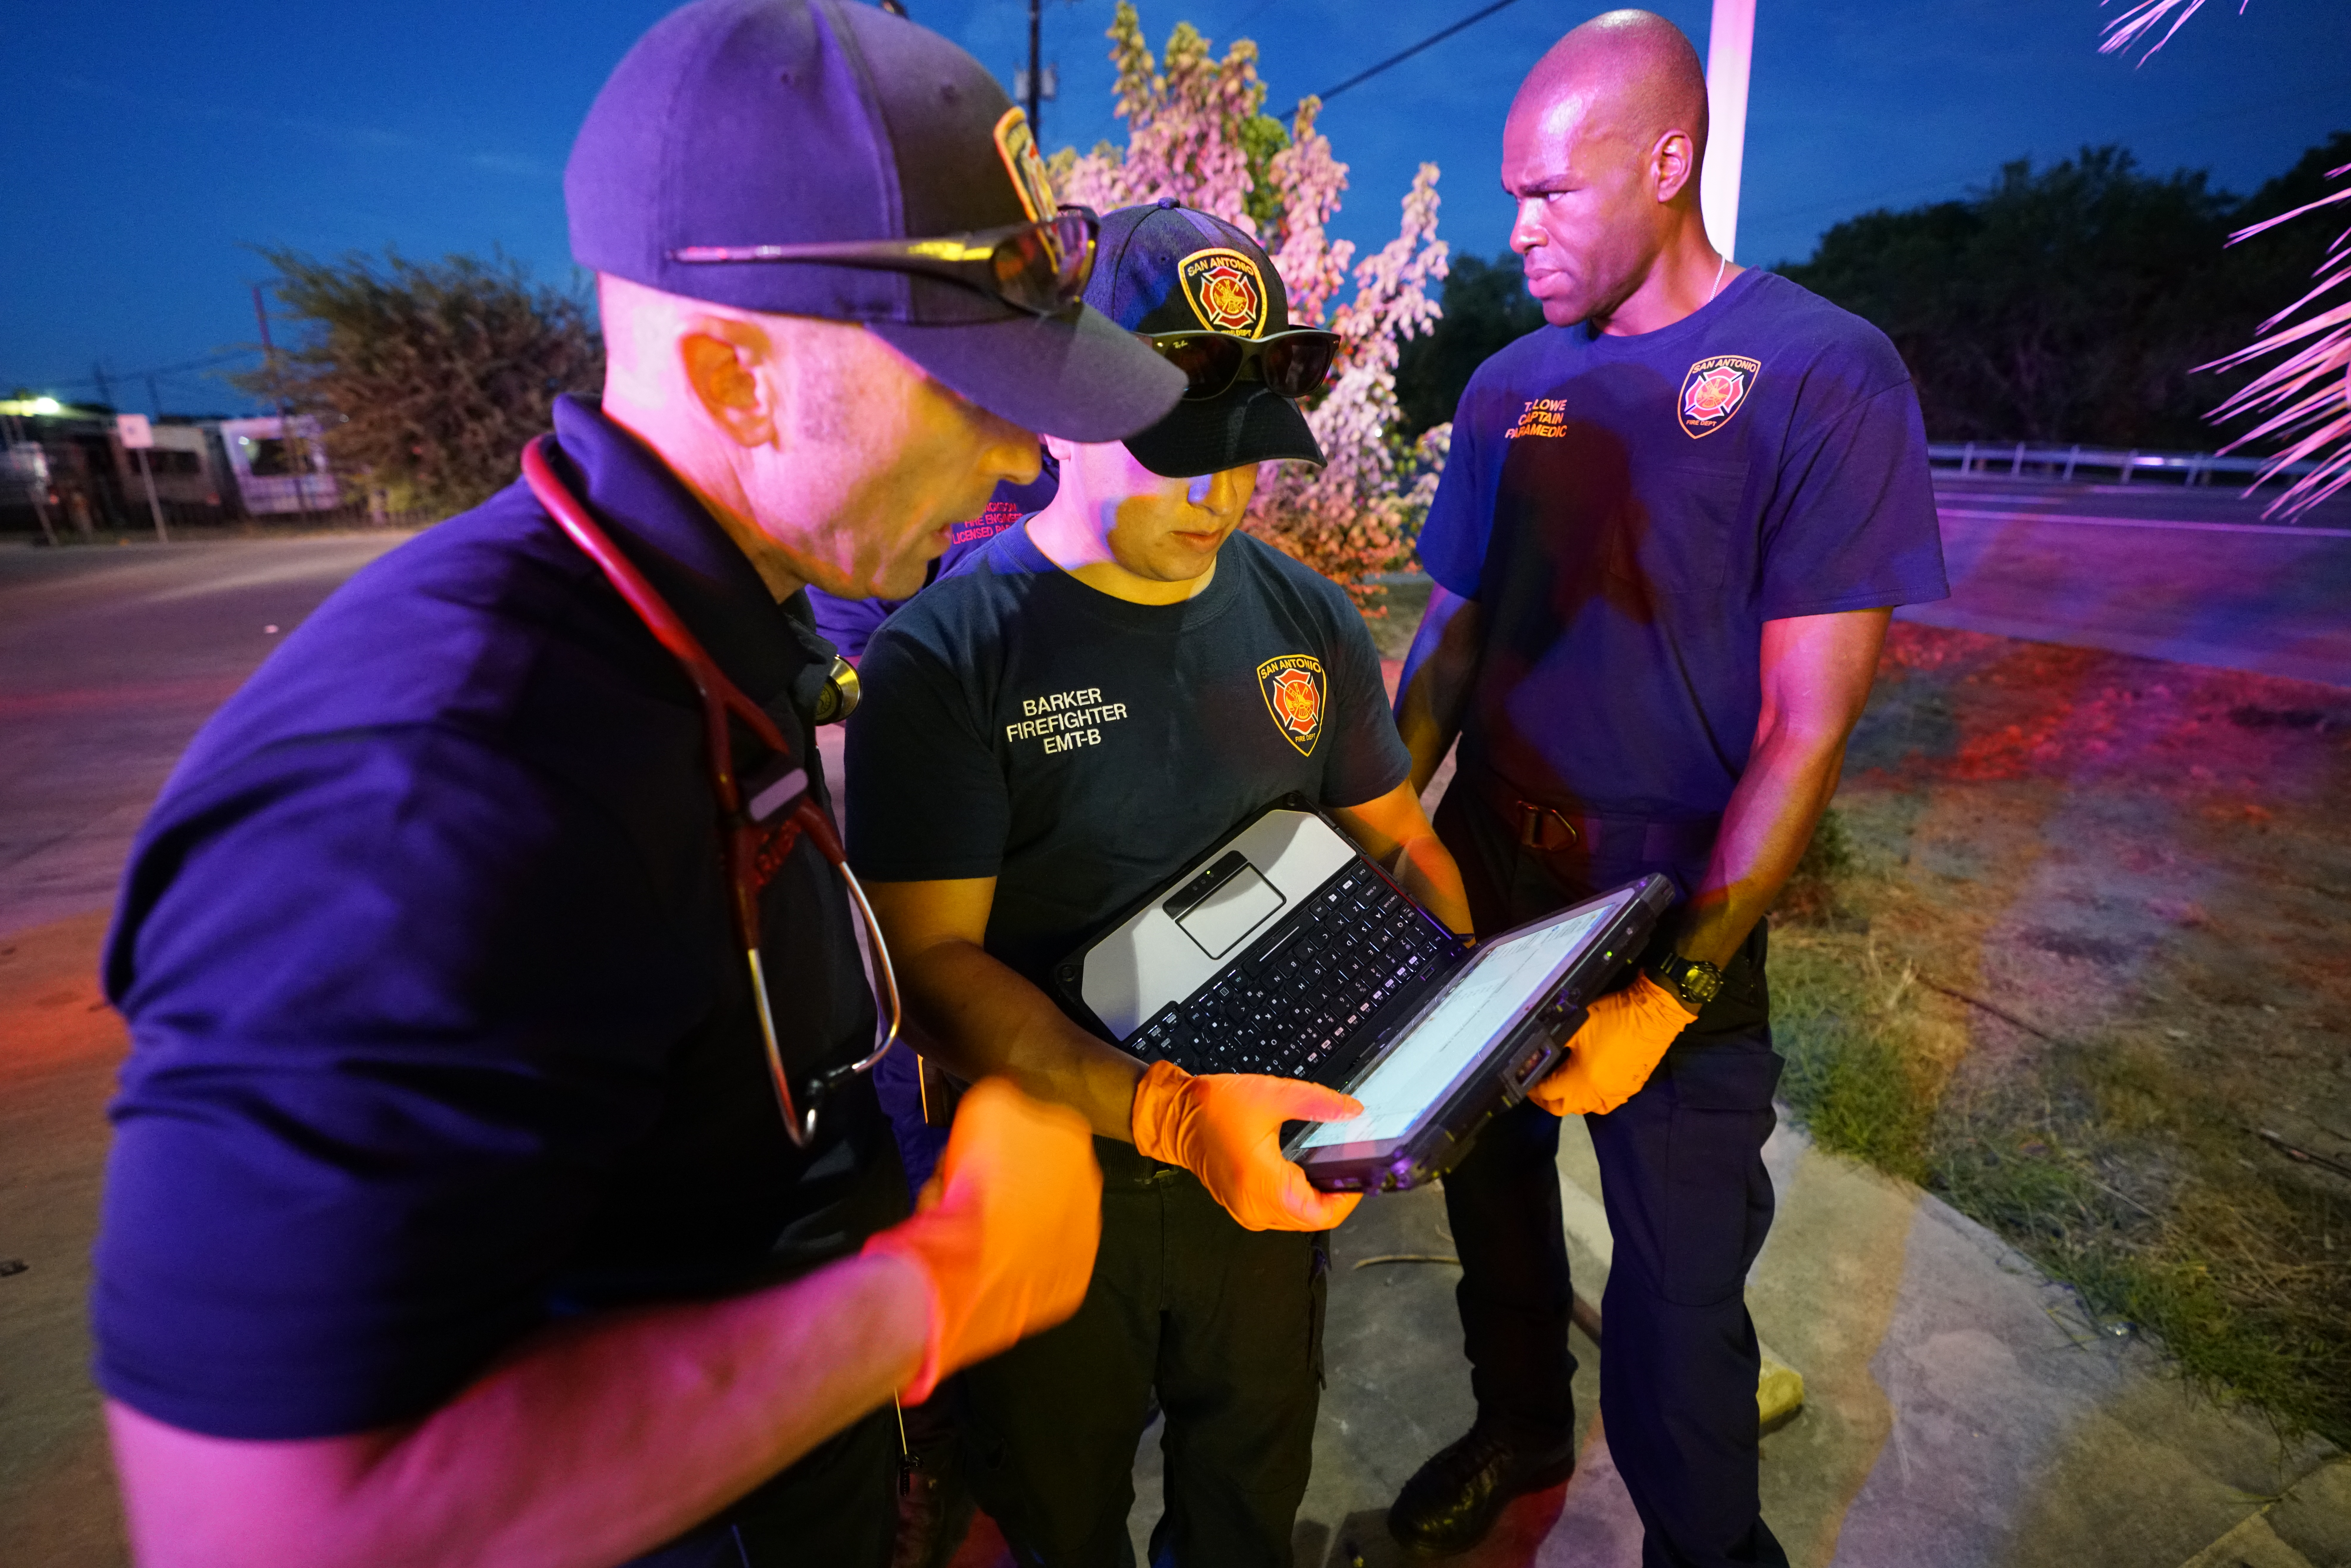 San Fransisco Fire Department Team Looking At Laptop